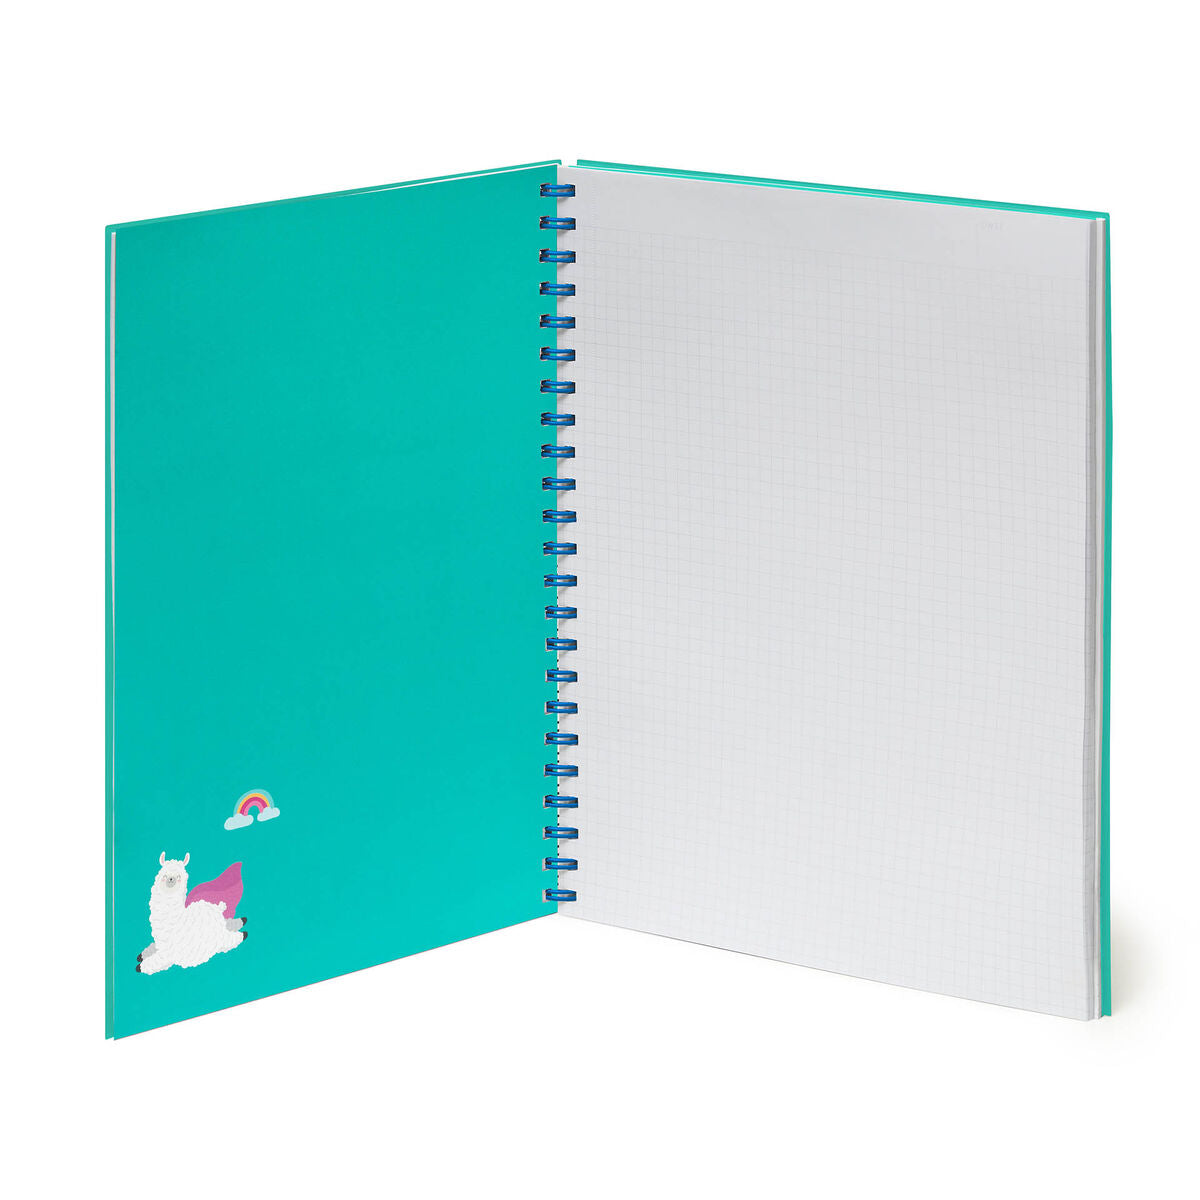 Notebooks - Legami Maxi Trio Spiral Notebook - No Probllama by Weirs of Baggot Street